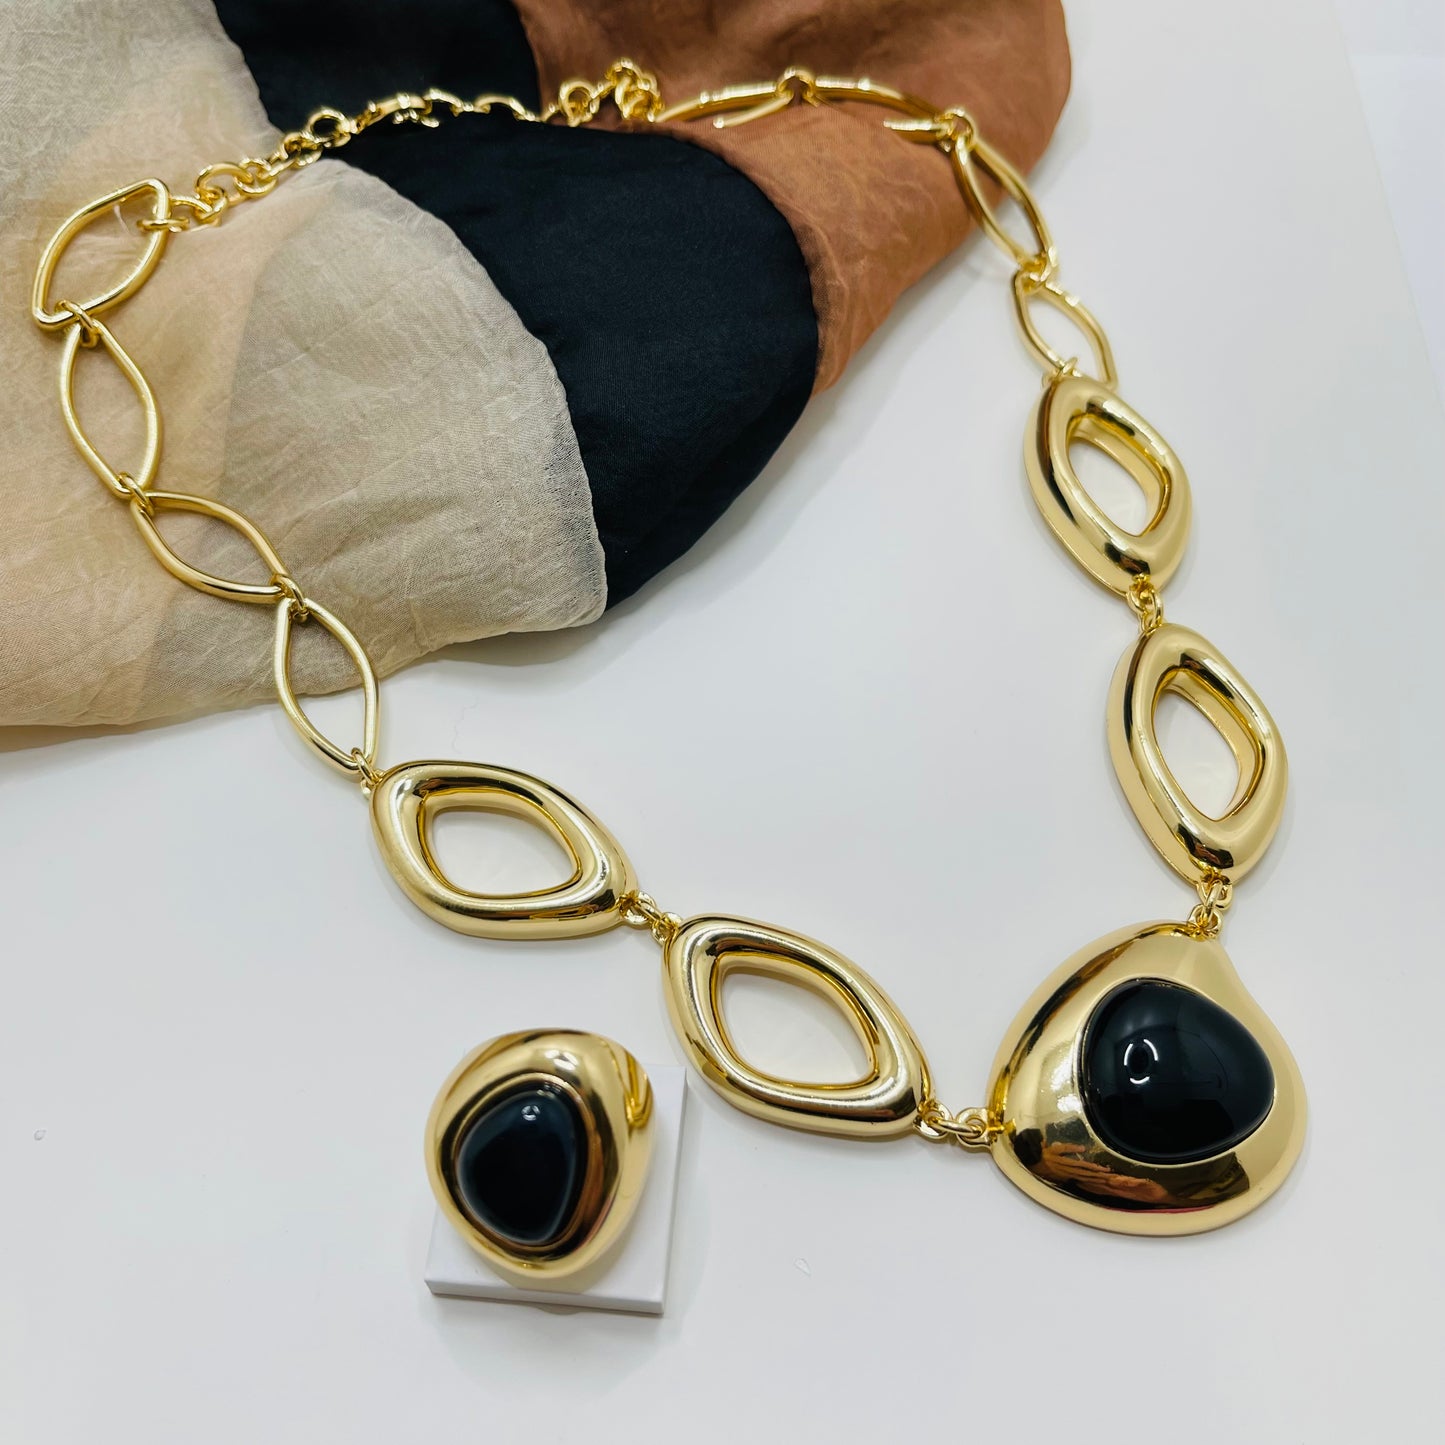 Select Bold Necklace - Black Agate